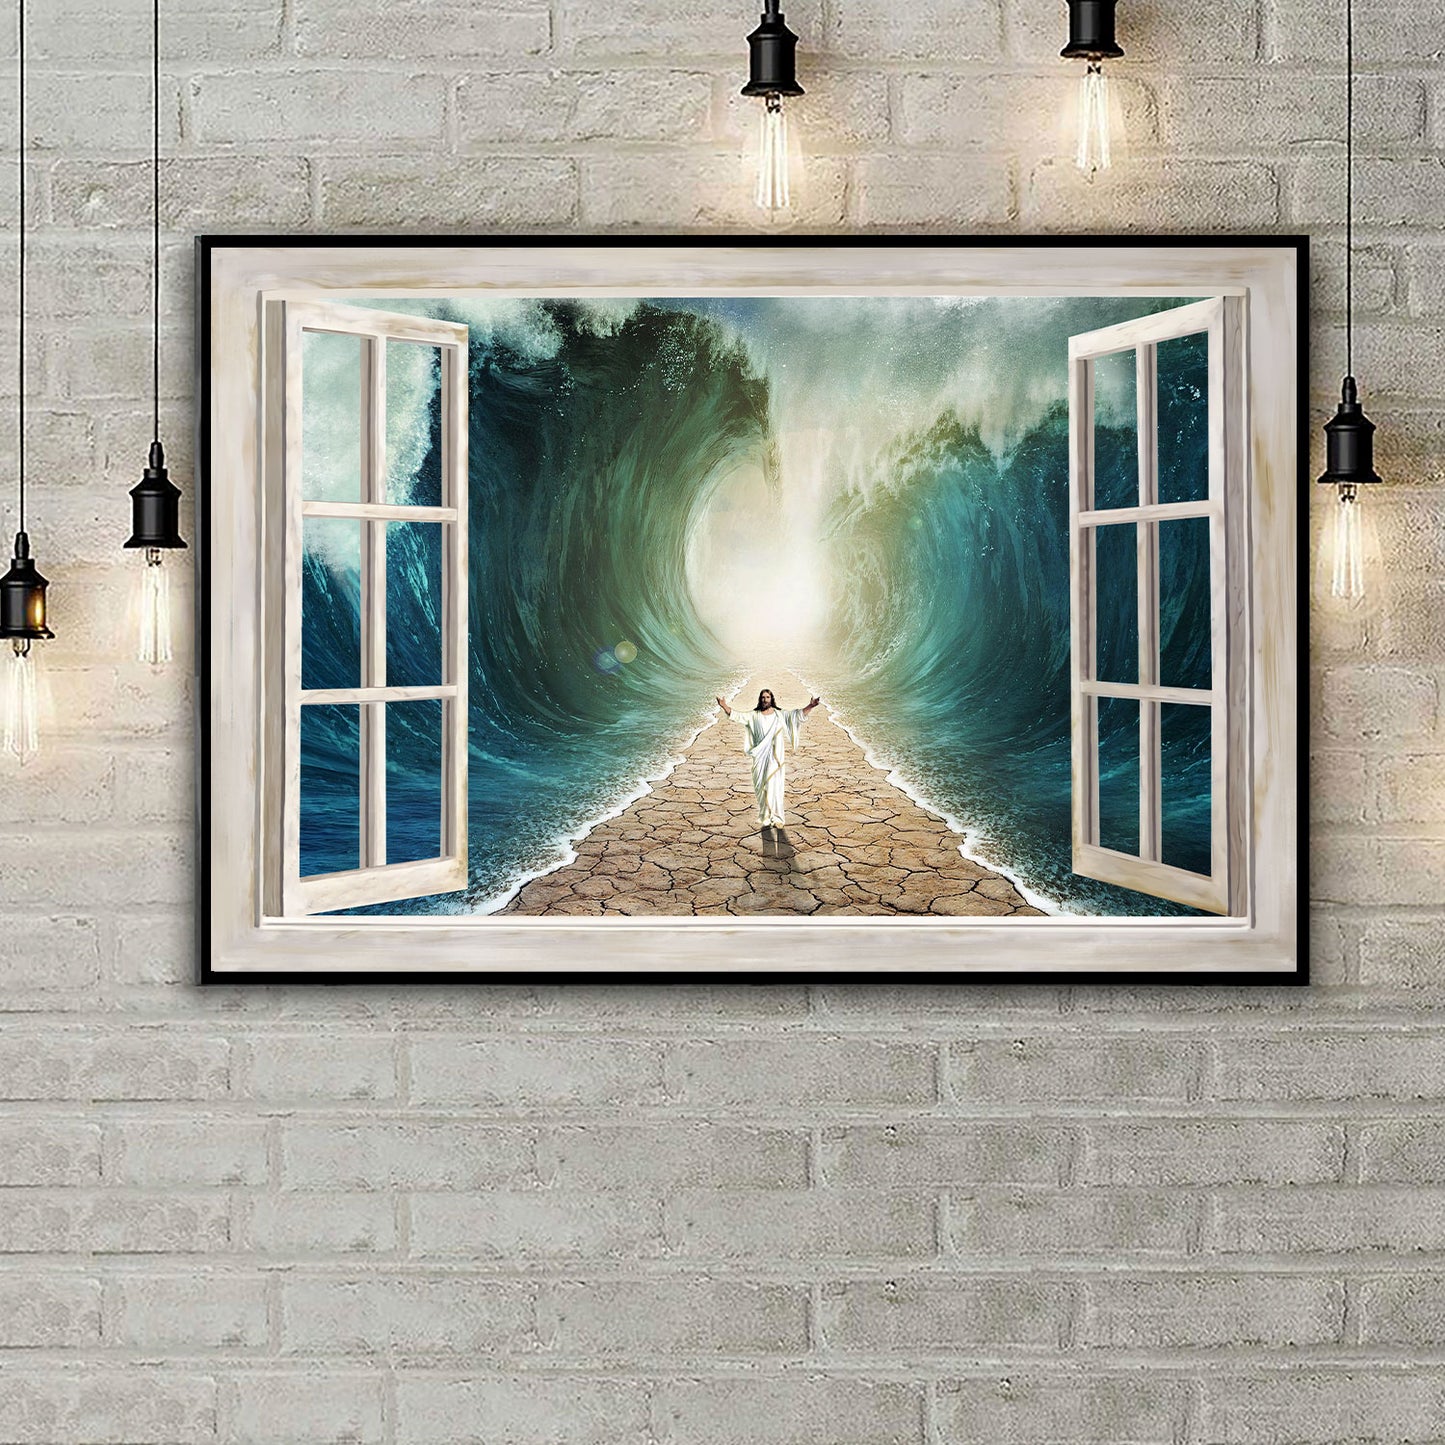 Parted Sea With Jesus WalKing On Dry Ground Window Frame Poster